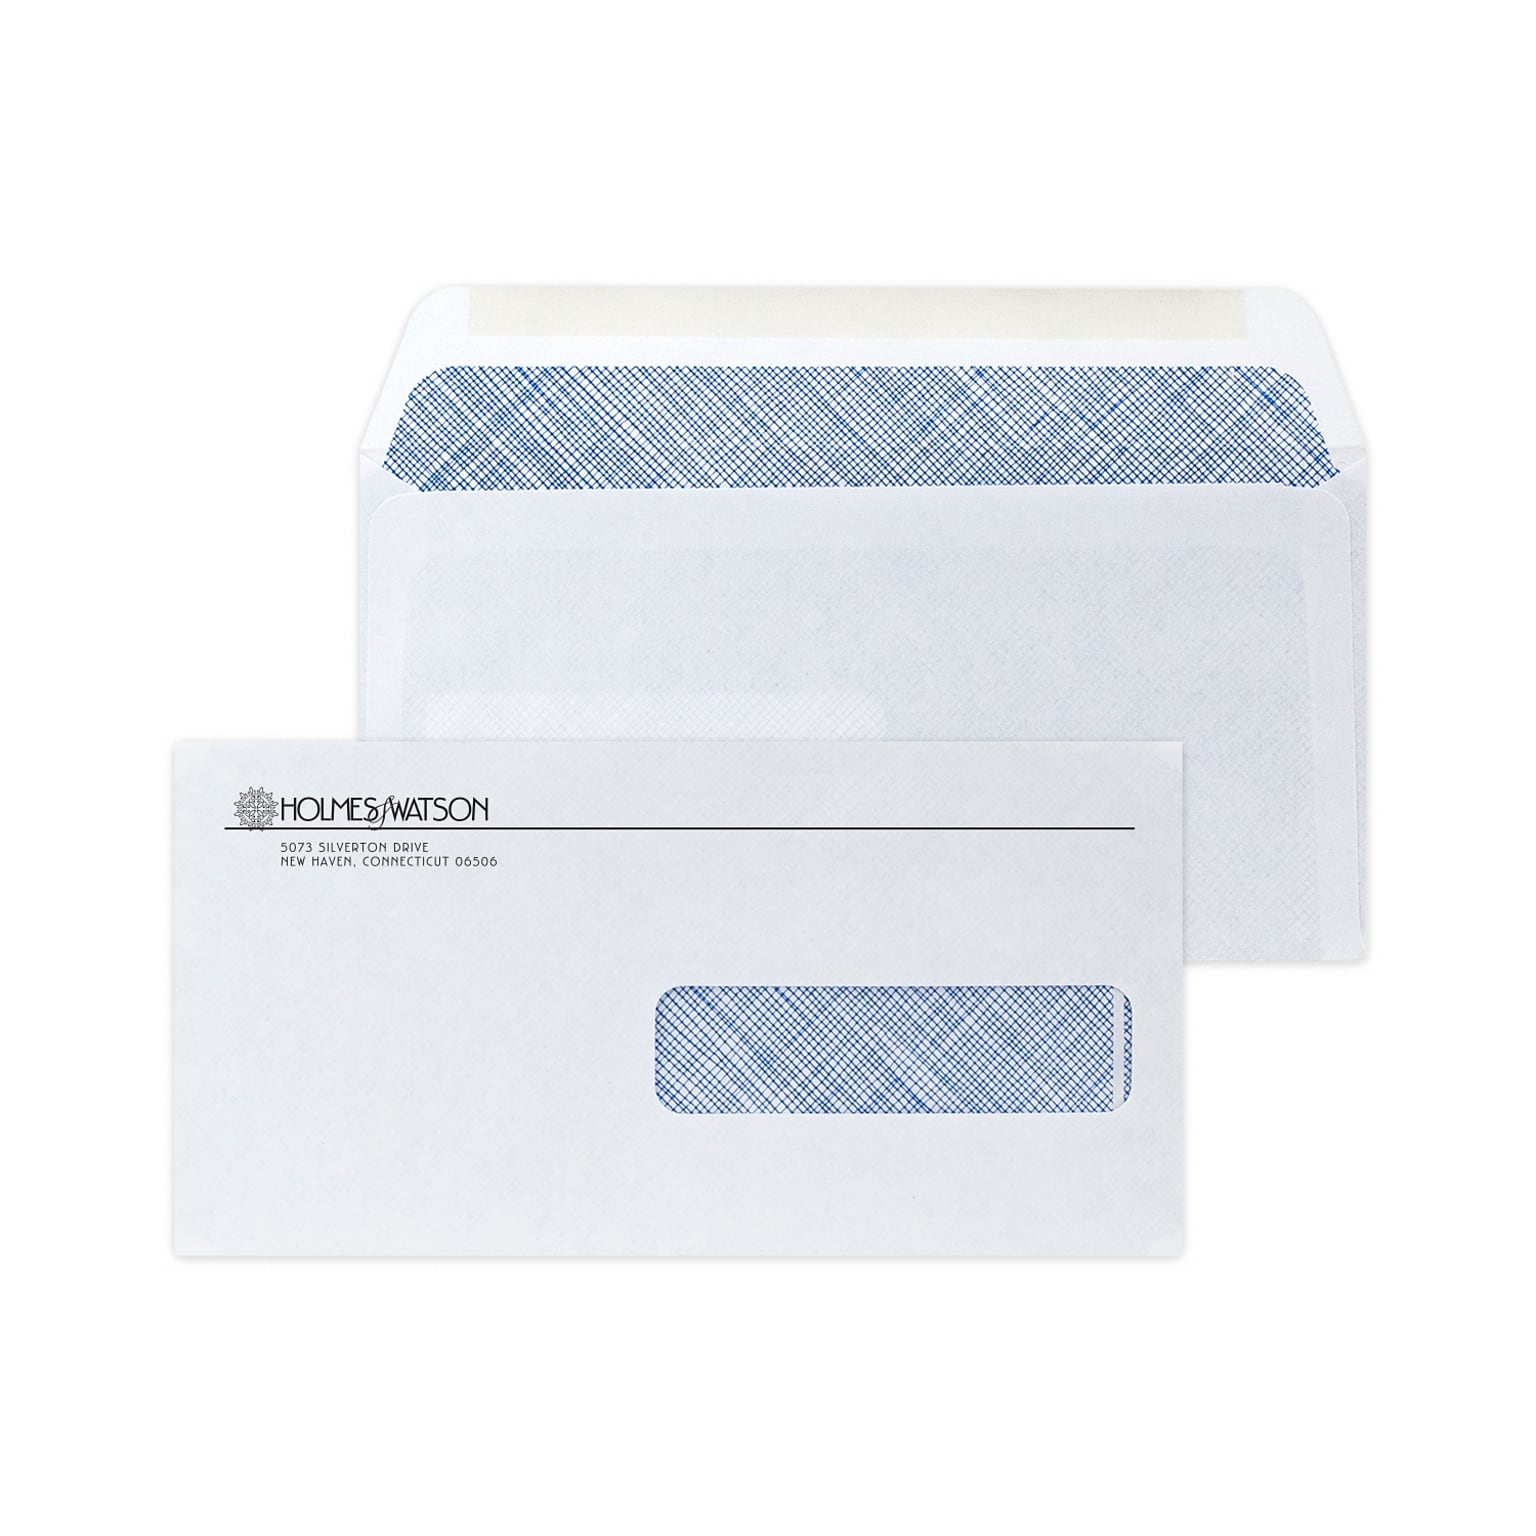 Custom 4-1/2 x 9 Insurance Claim Right Window Standard Envelopes with Security Tint, 24# White Wove, 1 Standard Ink, 250/Pack